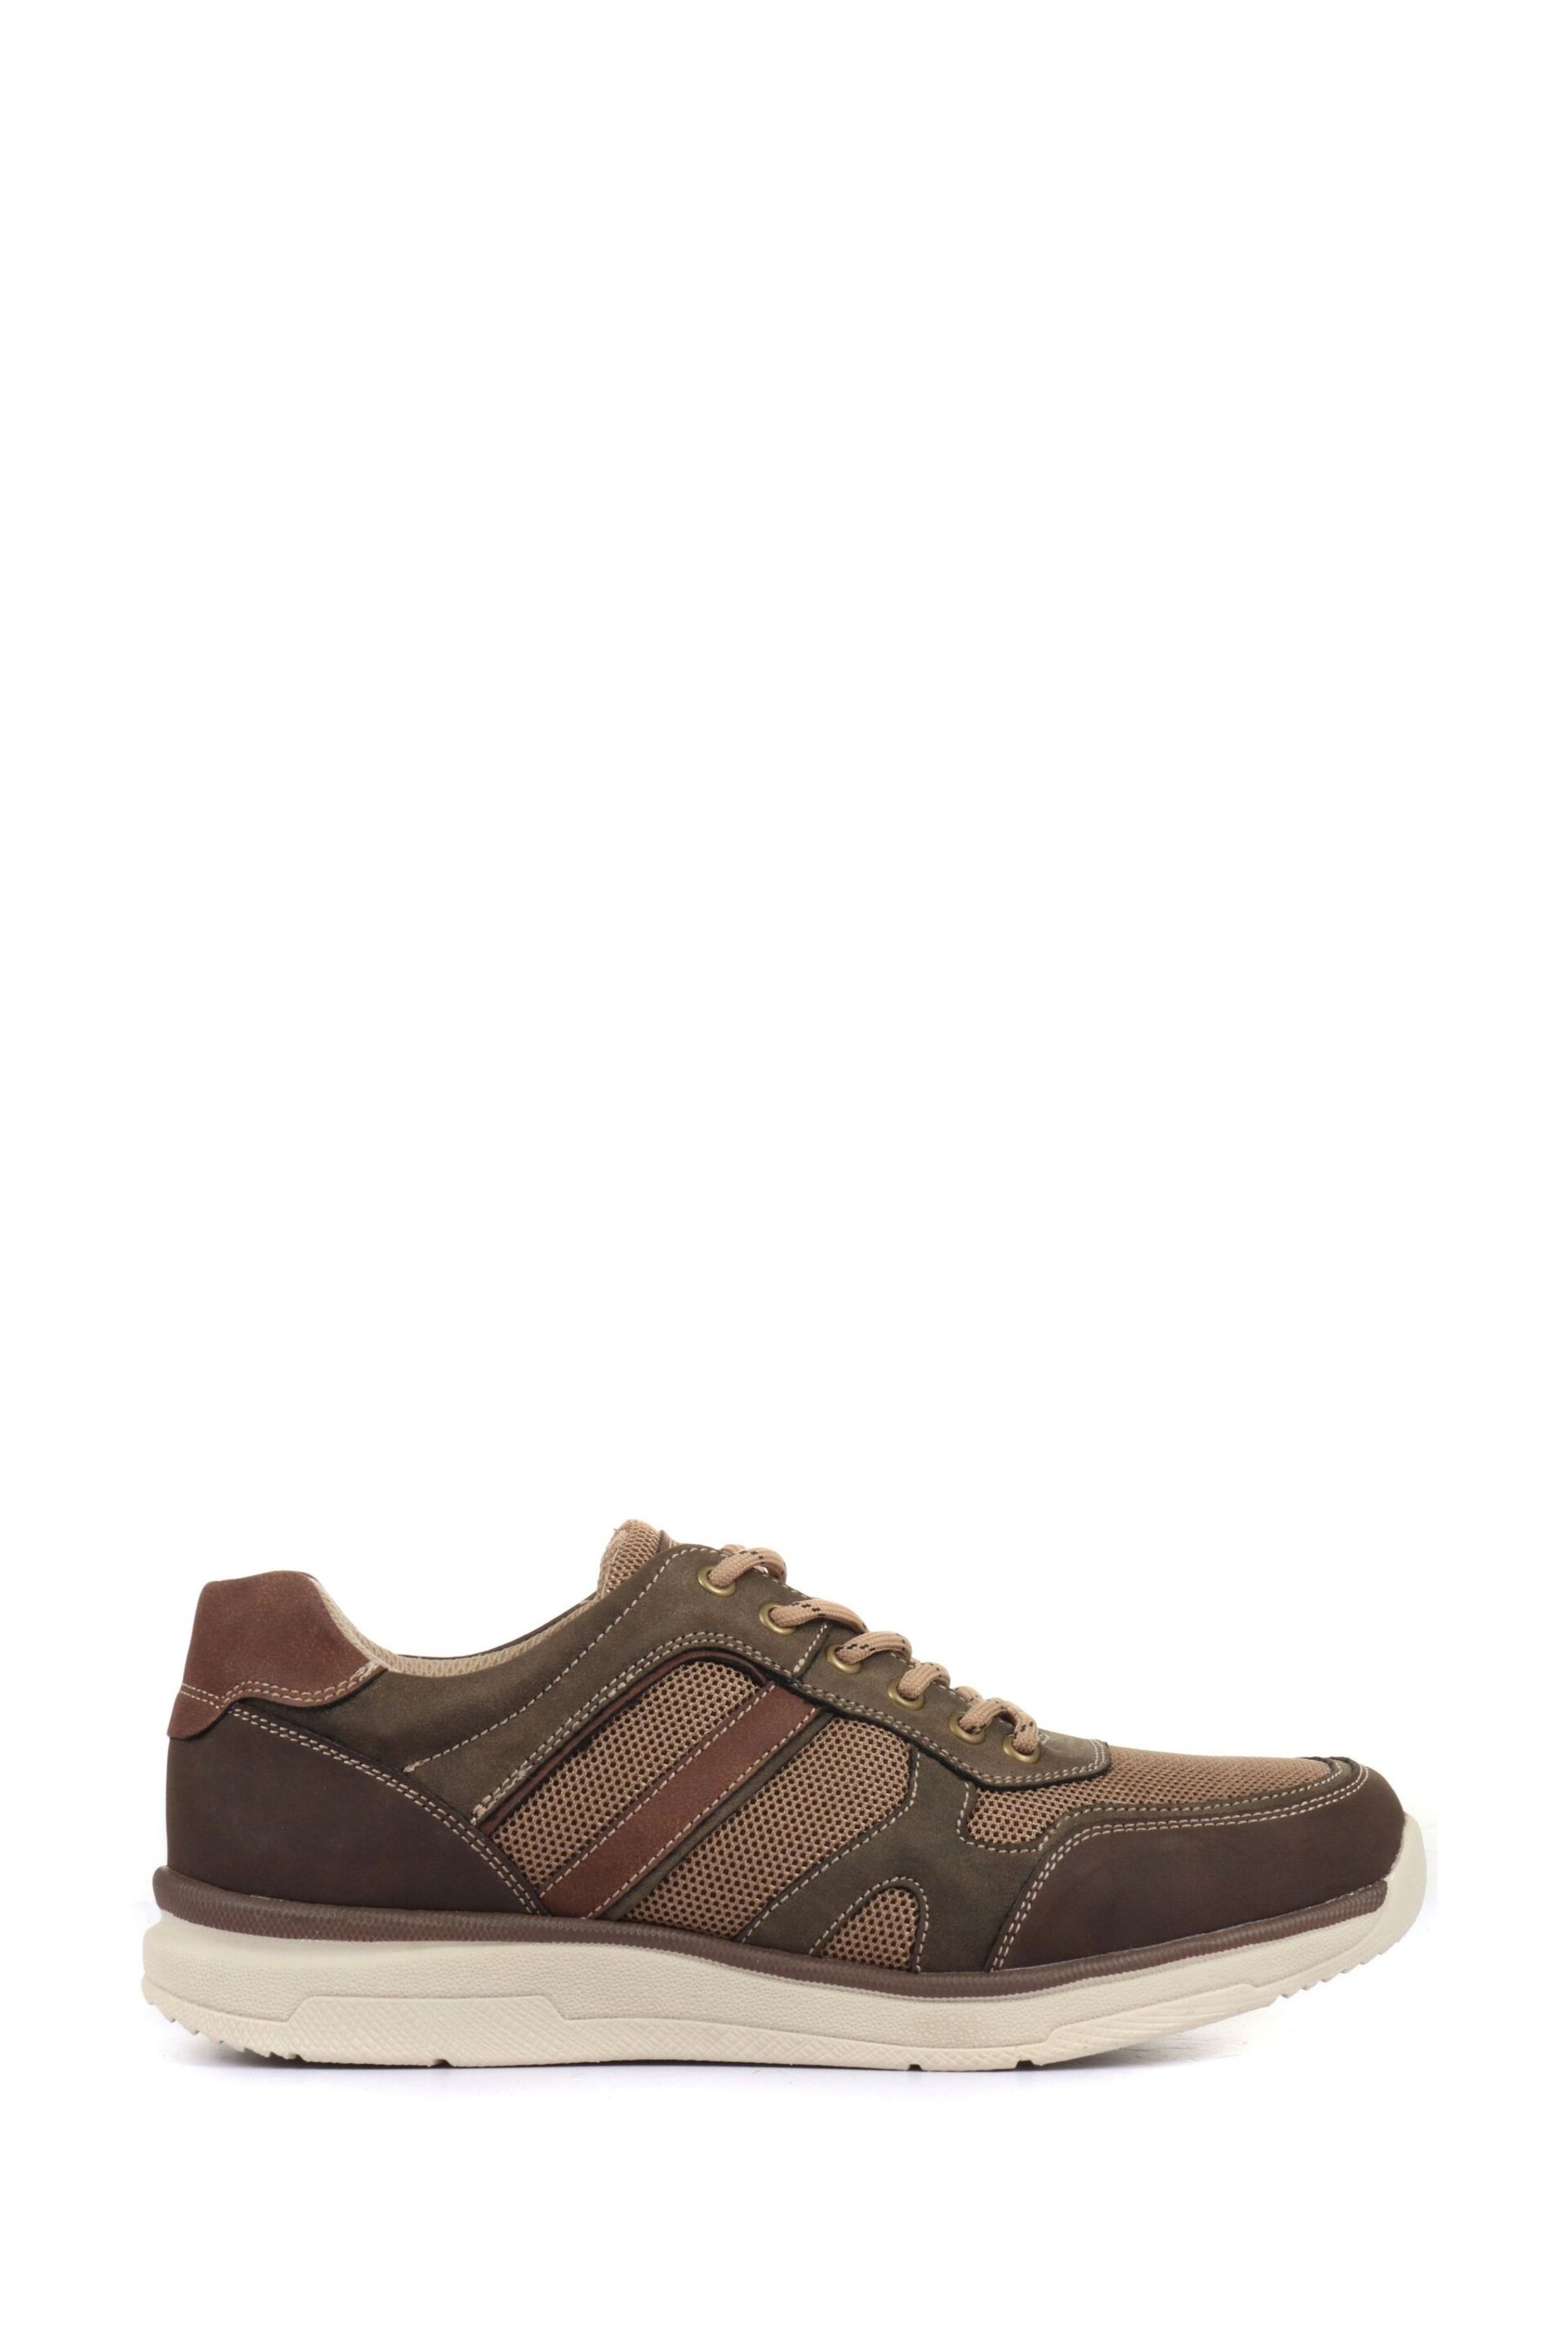 Pavers Brown Mens Wide Fit Trainers - Image 1 of 5